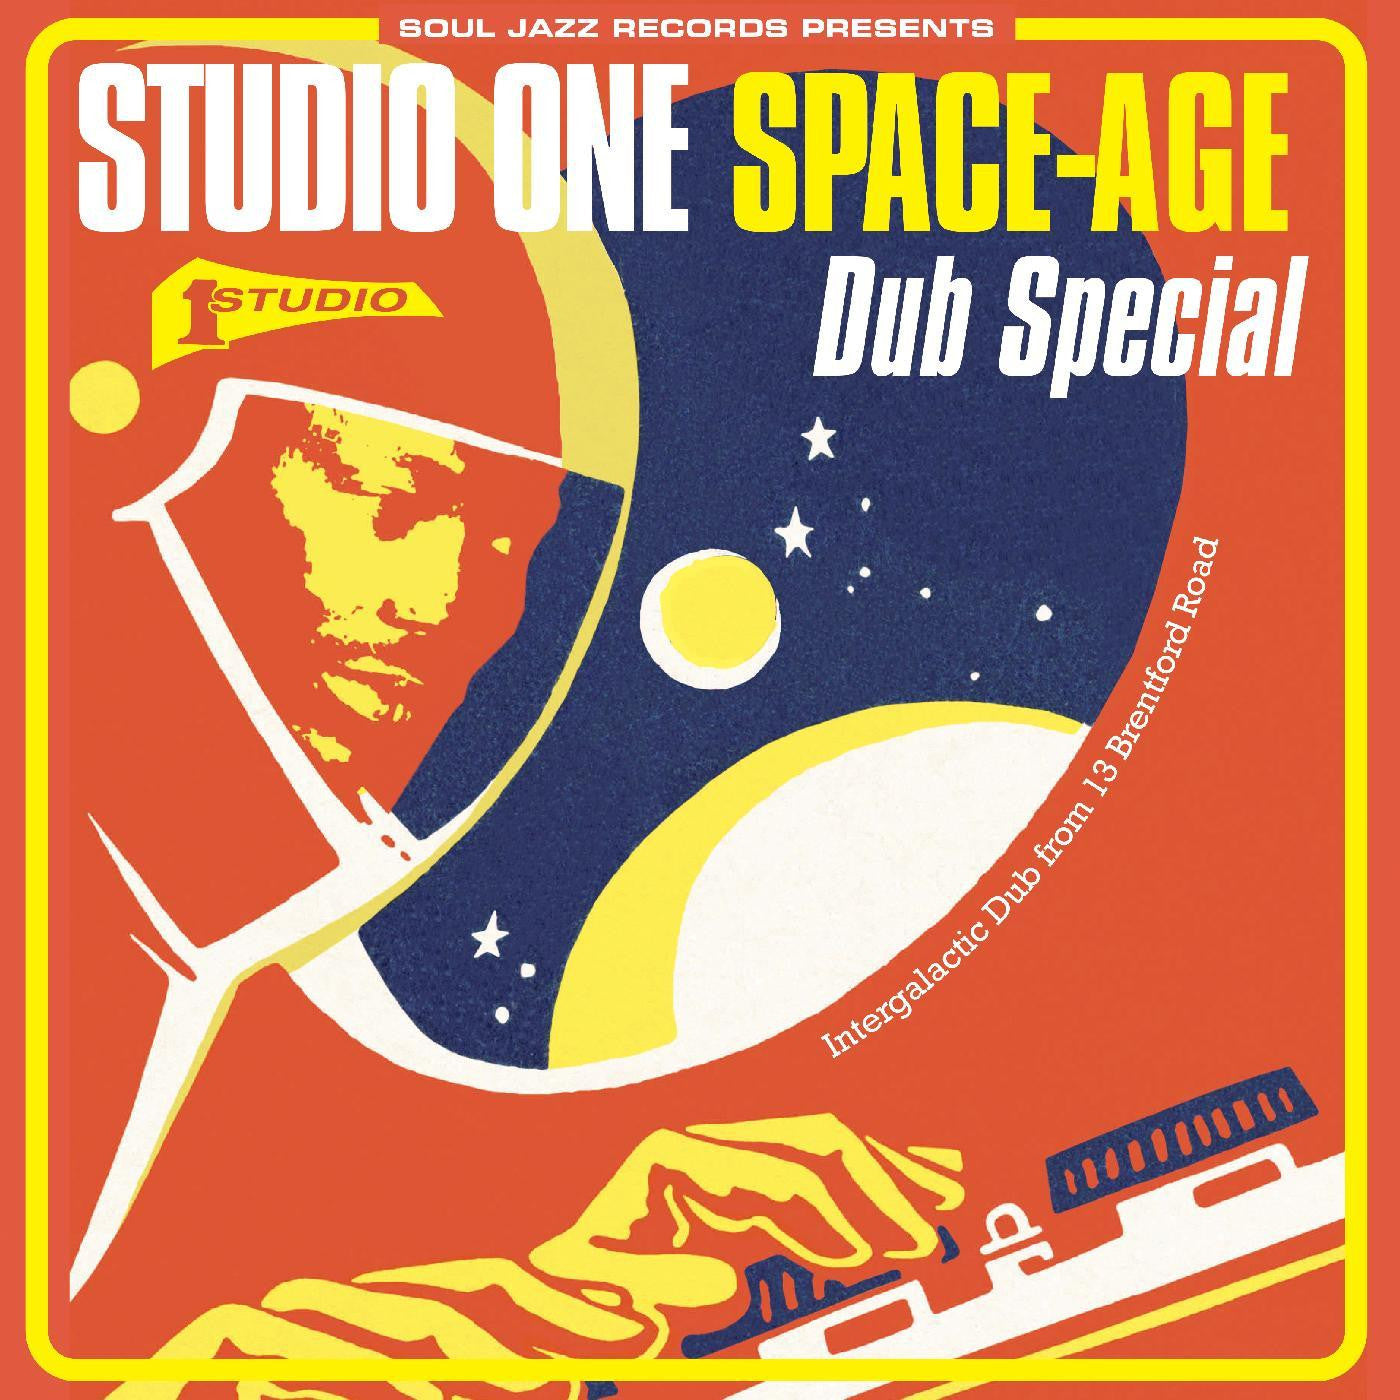 Soul Jazz Records - Studio One Space-Age Dub Special